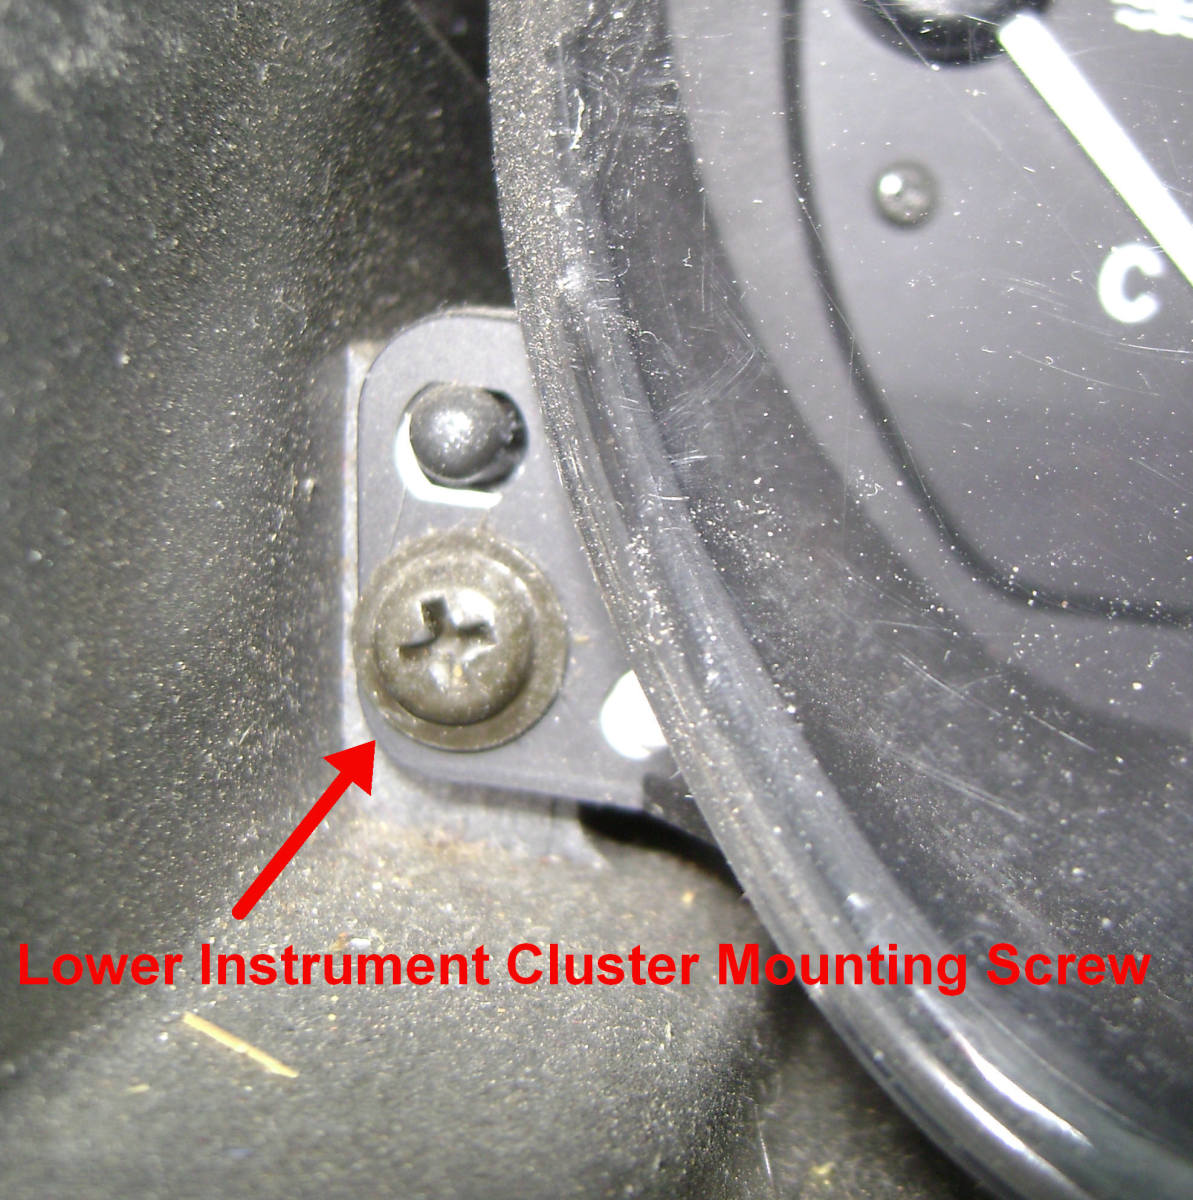 What retailers sell vehicle instrument cluster replacements?